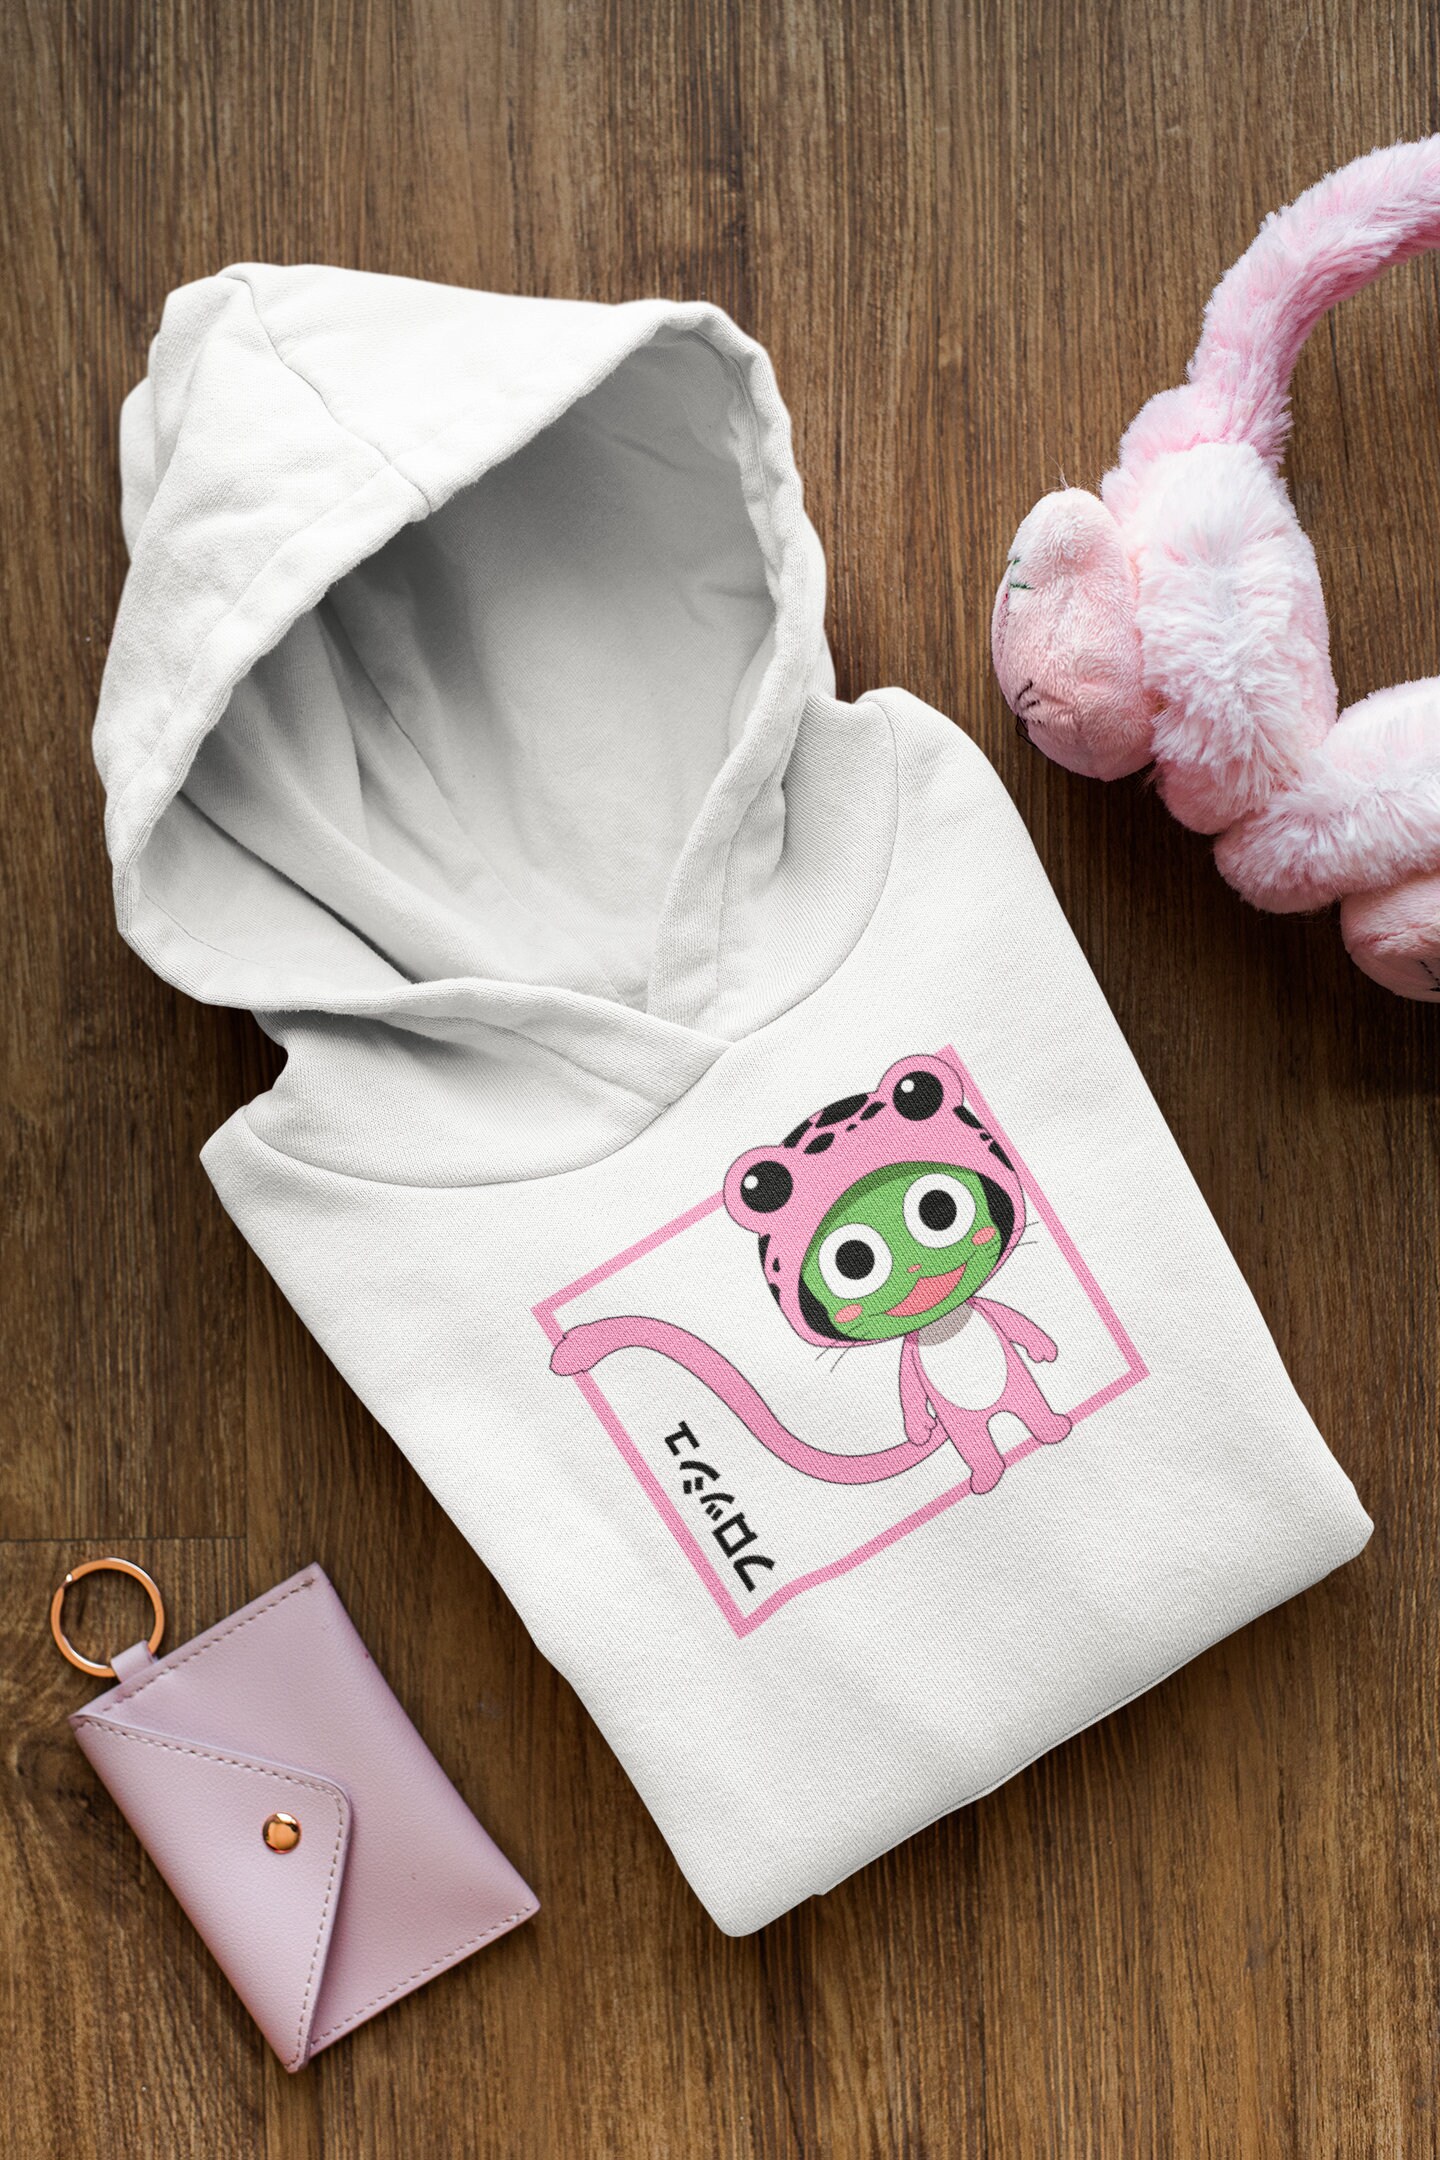 Fairy Tail Frosch Exceed Unisex Hoodie Exceed Fairy Tail Sabertooth Guild Anime Hoodie Rogue Cheney Fairy Tail Merch Fairy Tail Hoodie